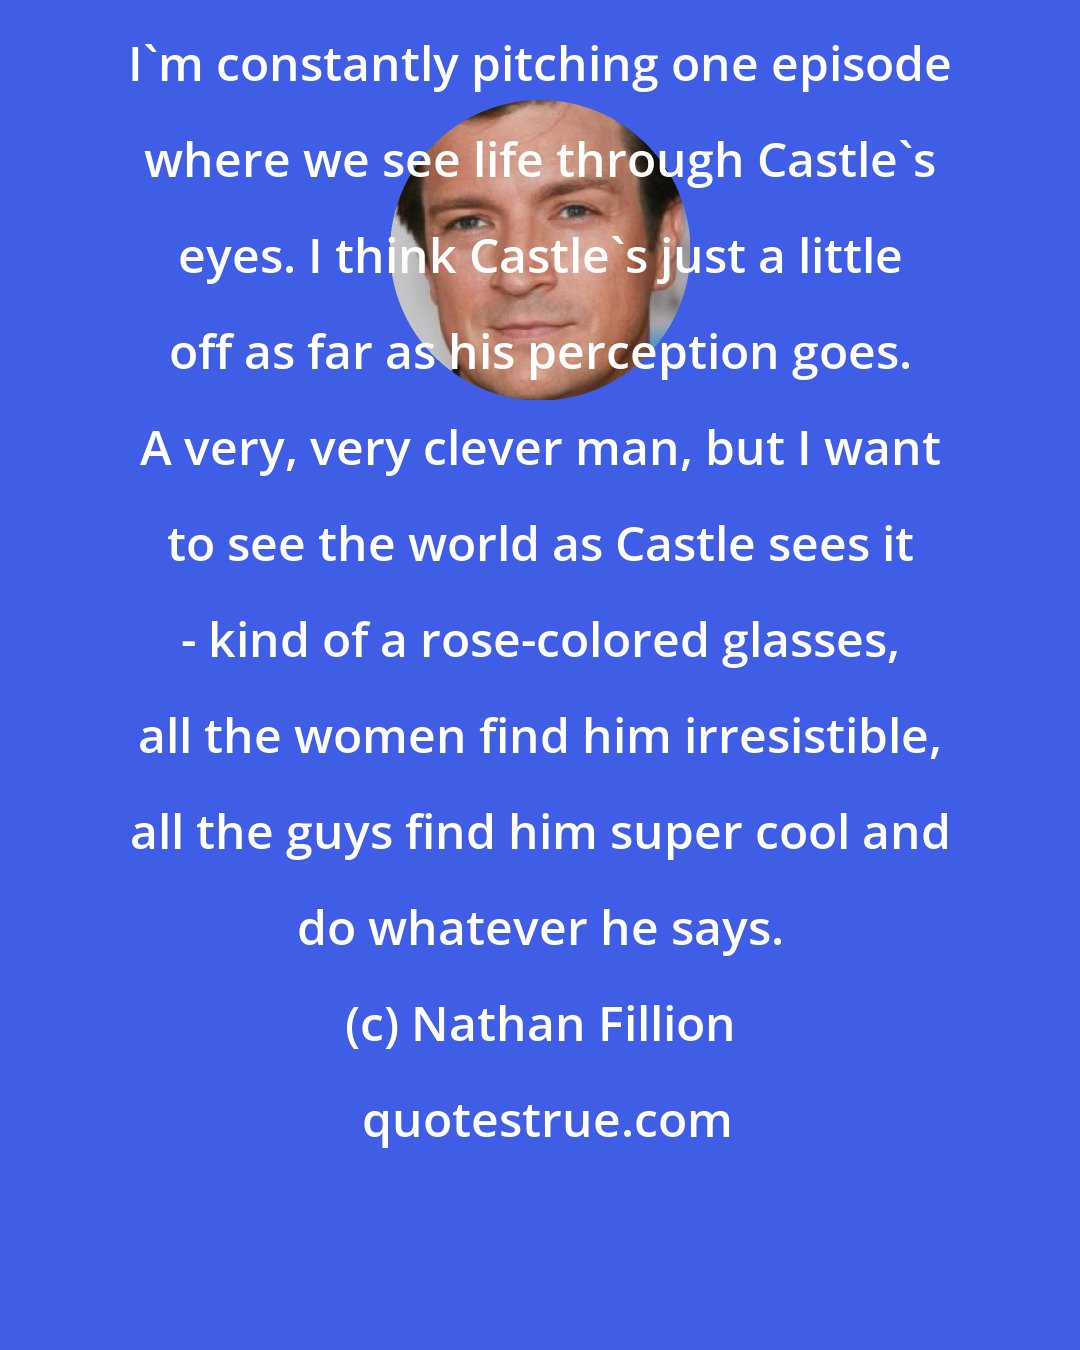 Nathan Fillion: I'm constantly pitching one episode where we see life through Castle's eyes. I think Castle's just a little off as far as his perception goes. A very, very clever man, but I want to see the world as Castle sees it - kind of a rose-colored glasses, all the women find him irresistible, all the guys find him super cool and do whatever he says.